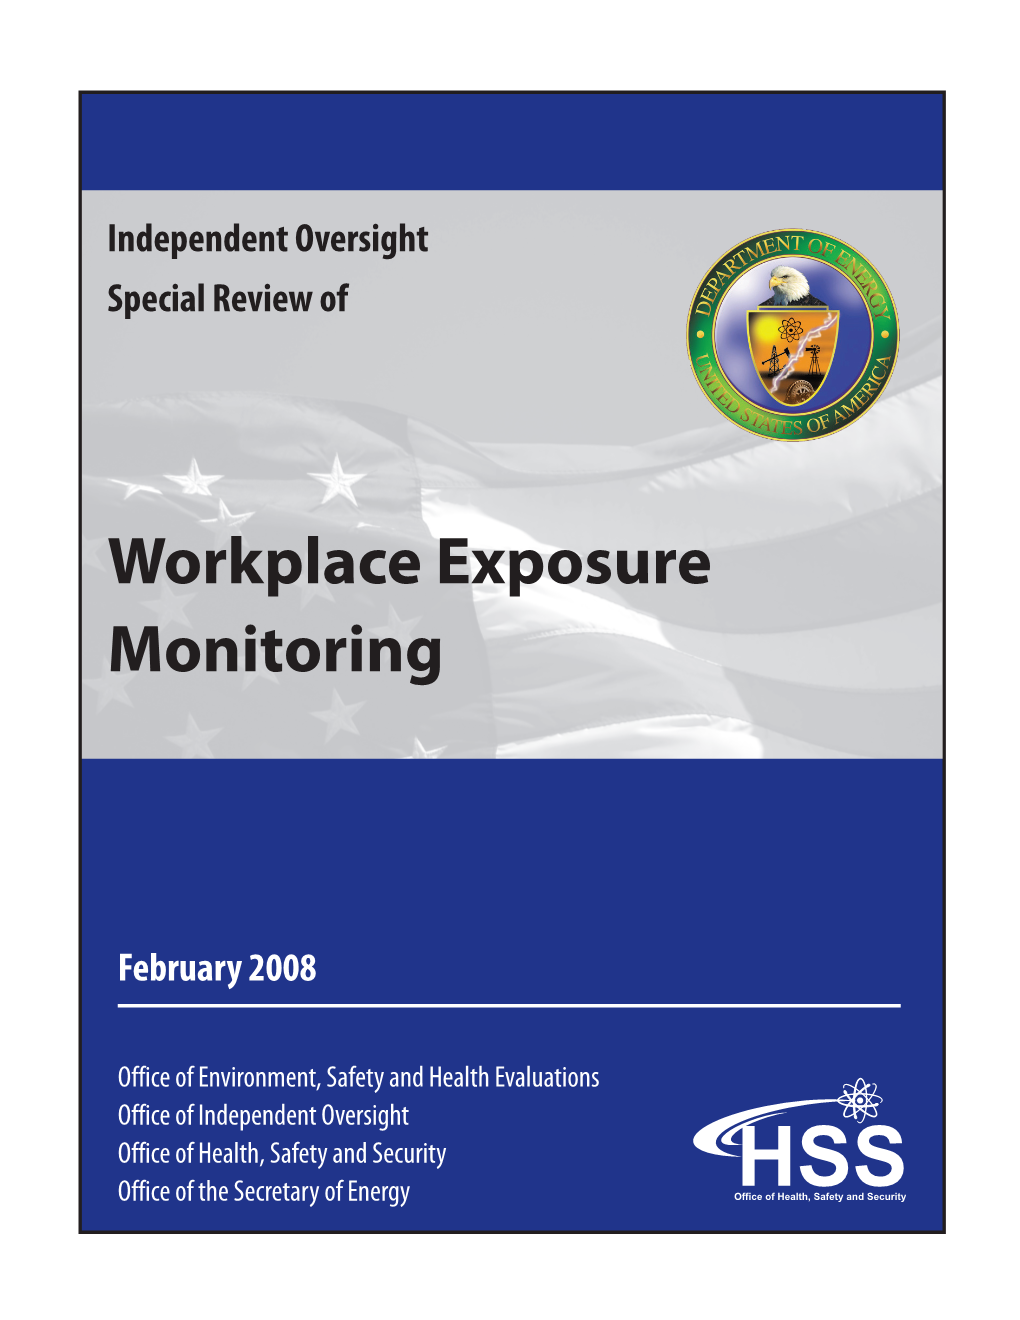 Workplace Exposure Monitoring